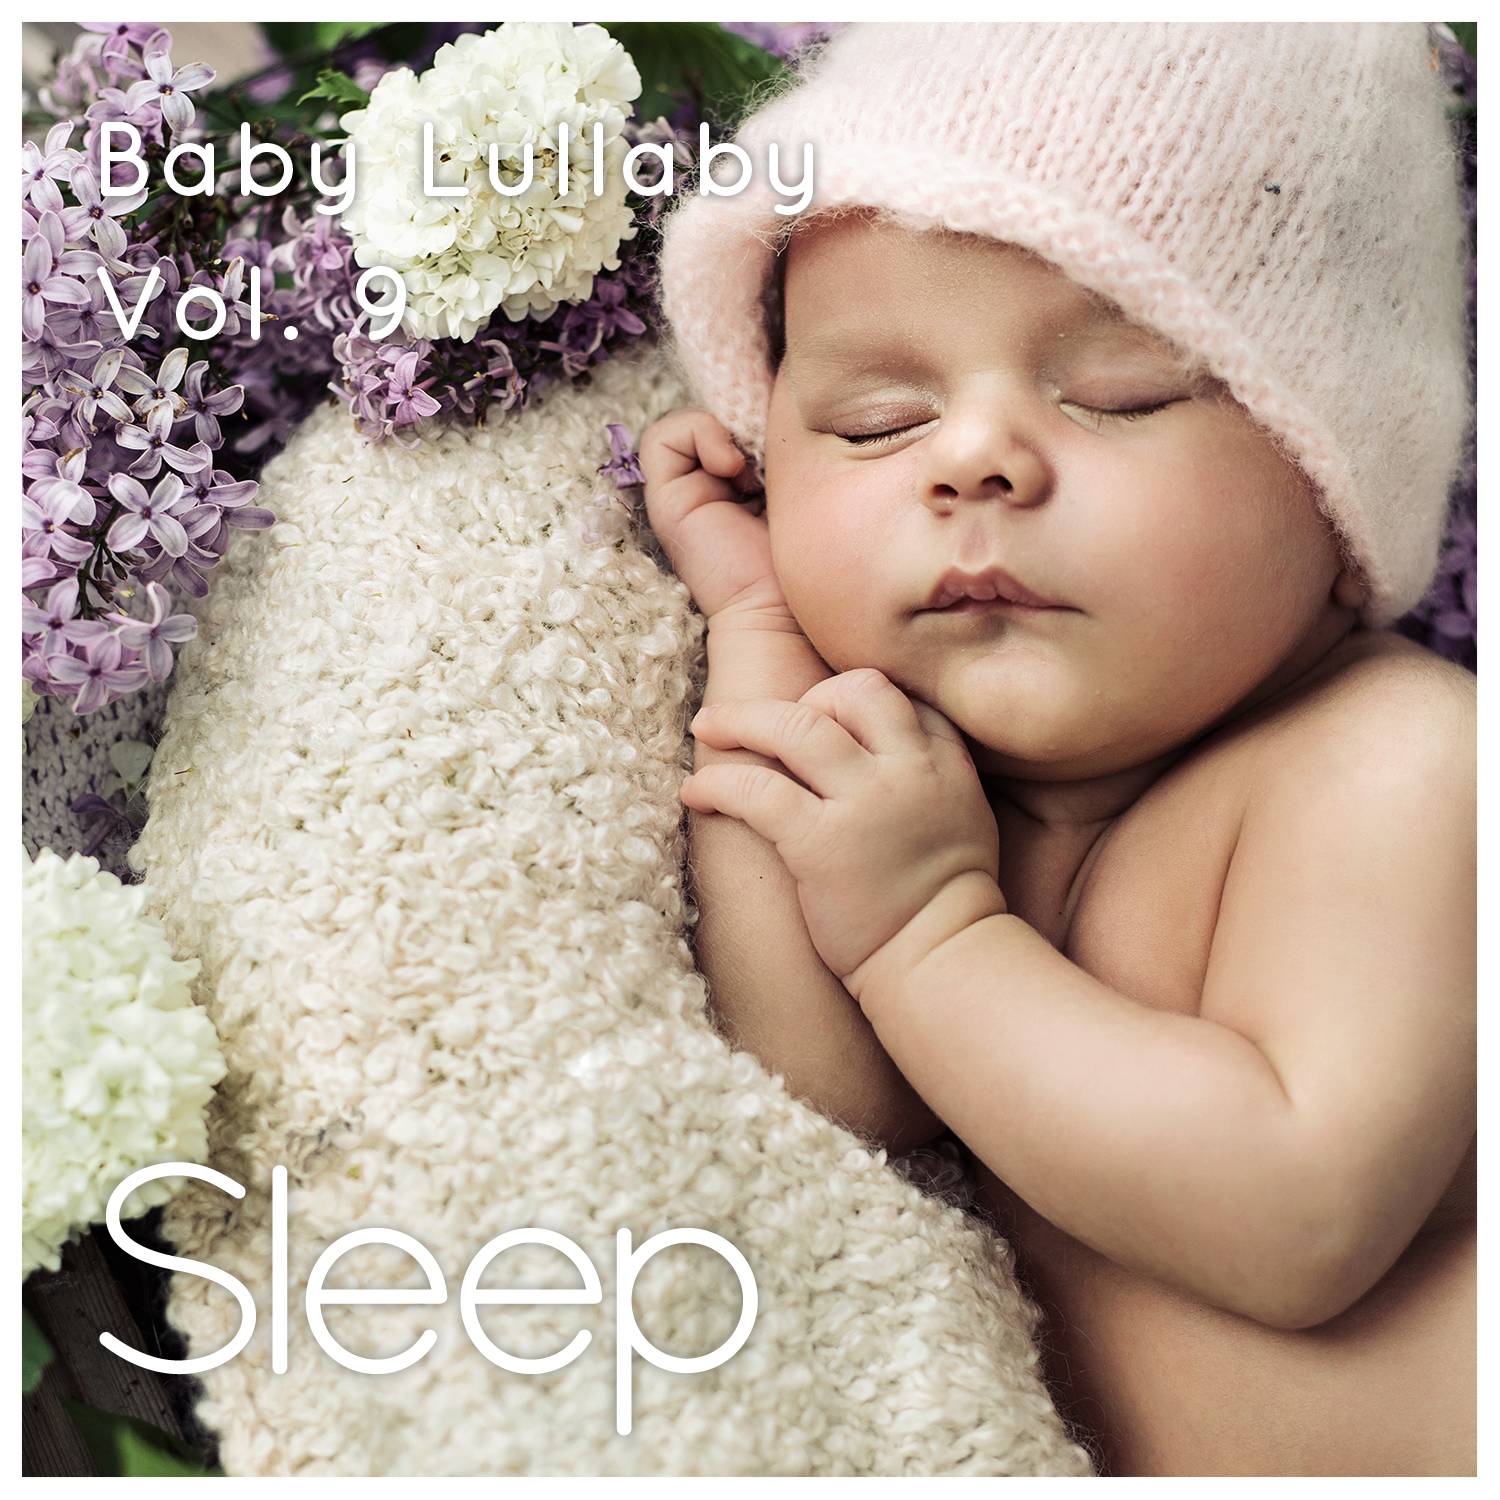 Baby Sleep Ambient Lullaby, Pt. 44